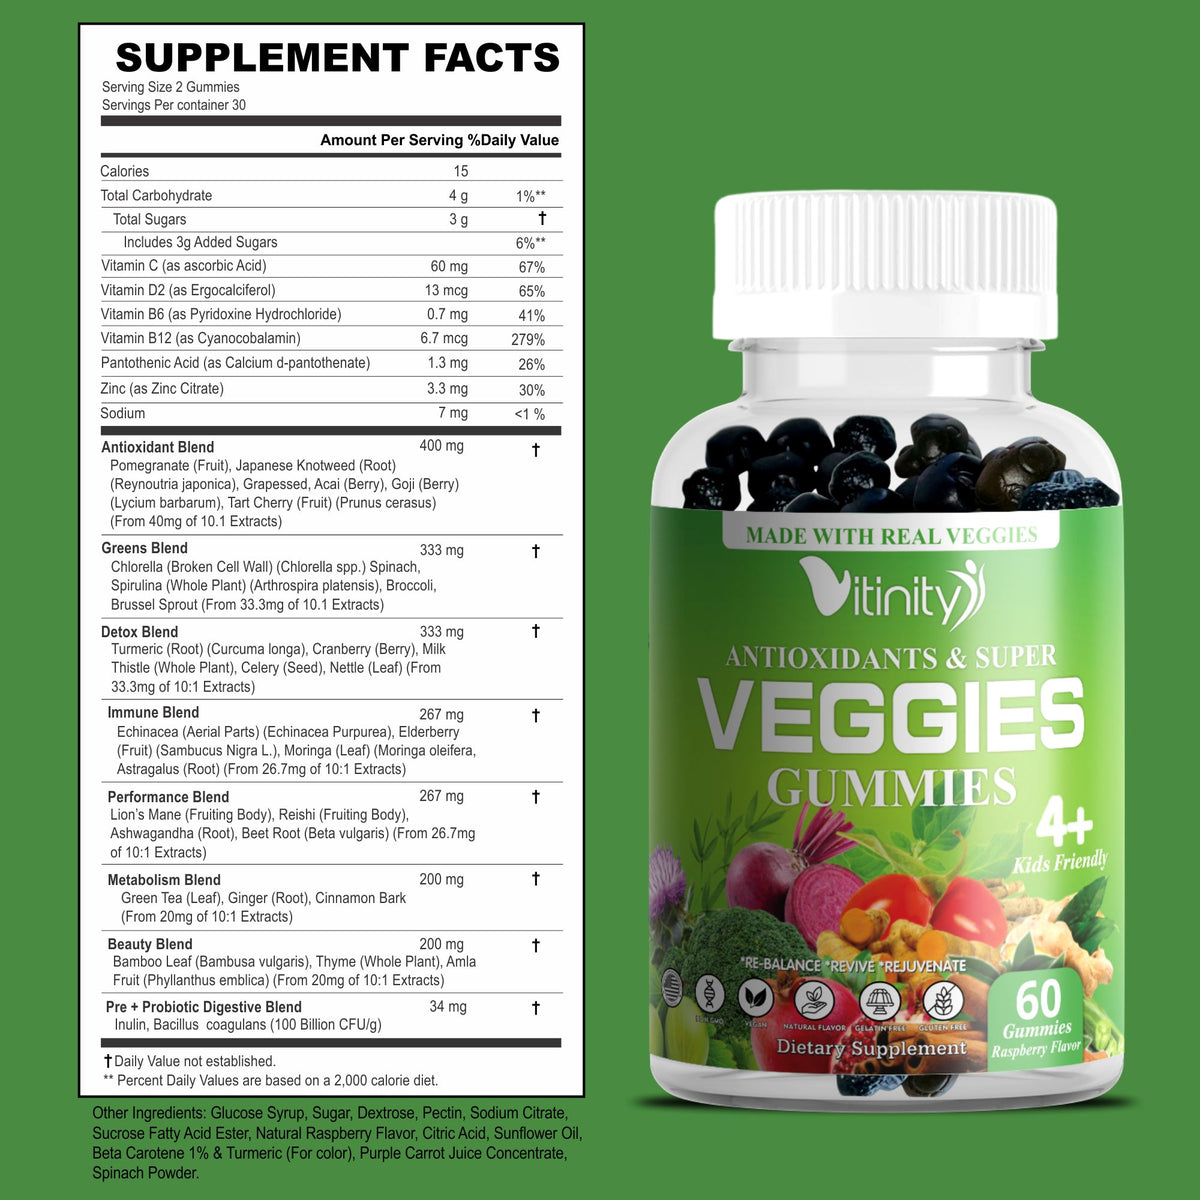 VITINITY Made with Real Super Veggies Delicious Gummy Supplement,Men,Women &amp; Kids(60 Chews),30 Veggies,Herbs,Fruit and Vegetable Vitamins,Non-GMO,Pectin-Based,Gluten-Free,No More Pills (60 Day Supply)